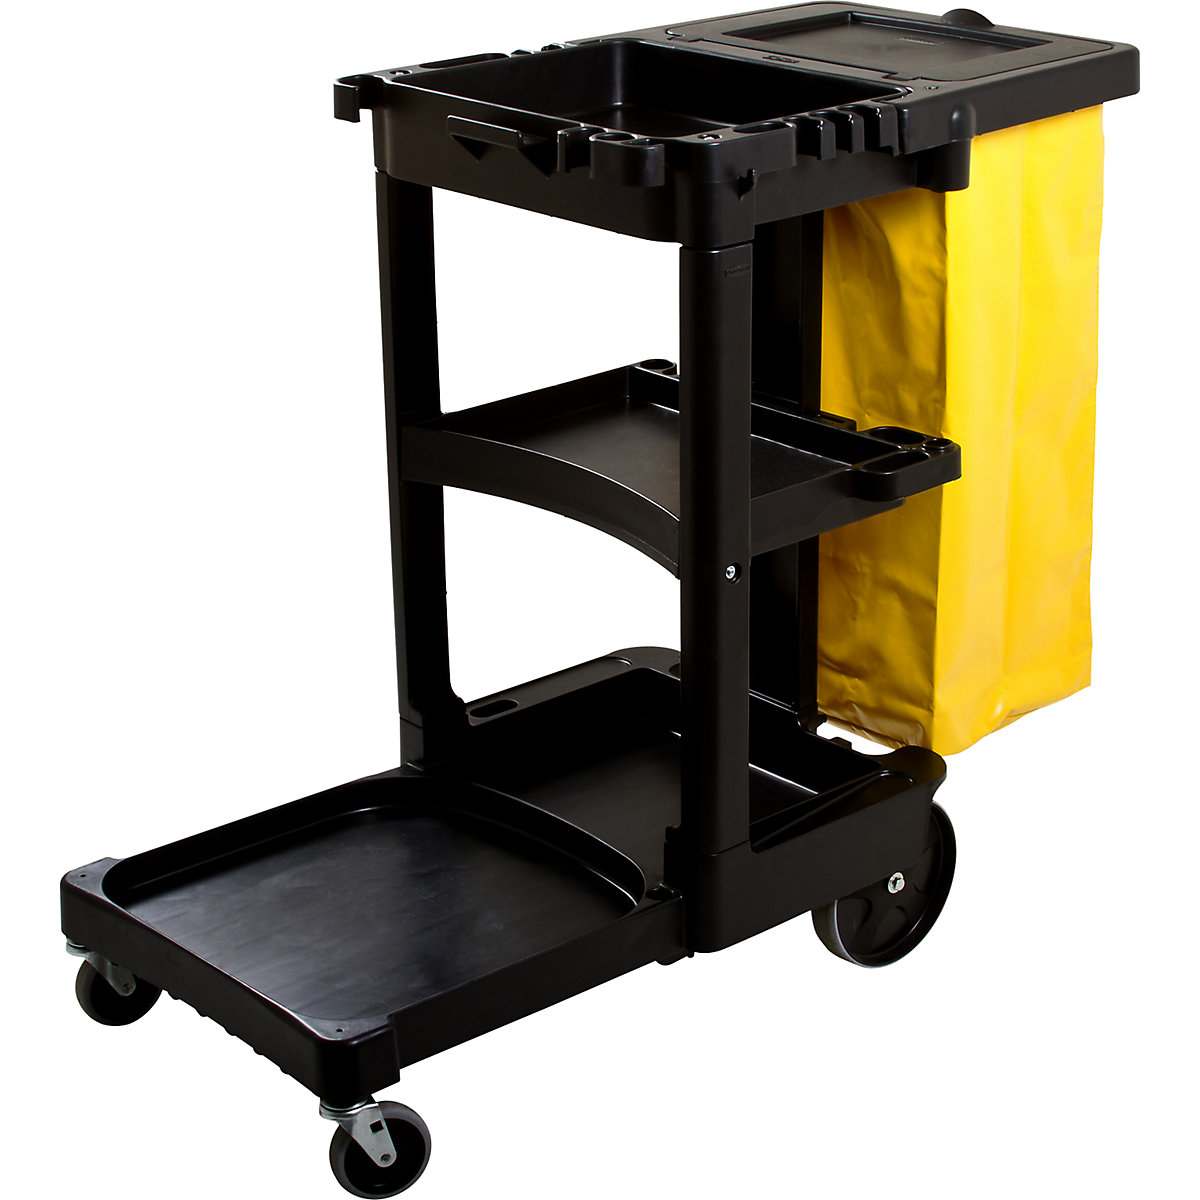 Cleaning trolley - Rubbermaid